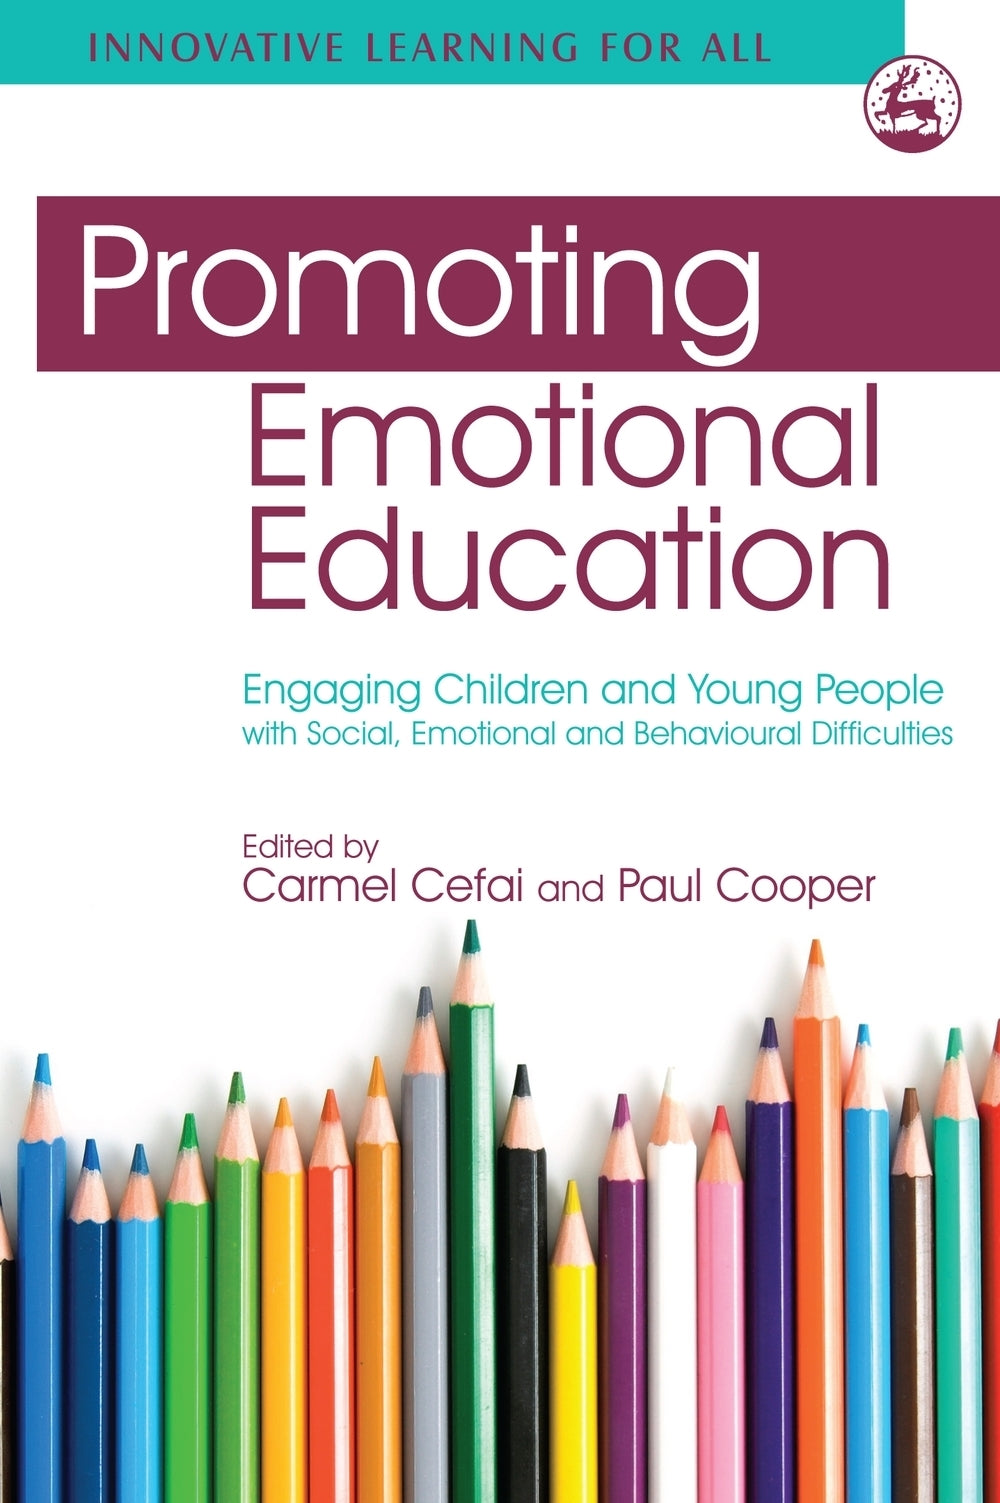 Promoting Emotional Education by Paul Cooper, Carmel Cefai, No Author Listed